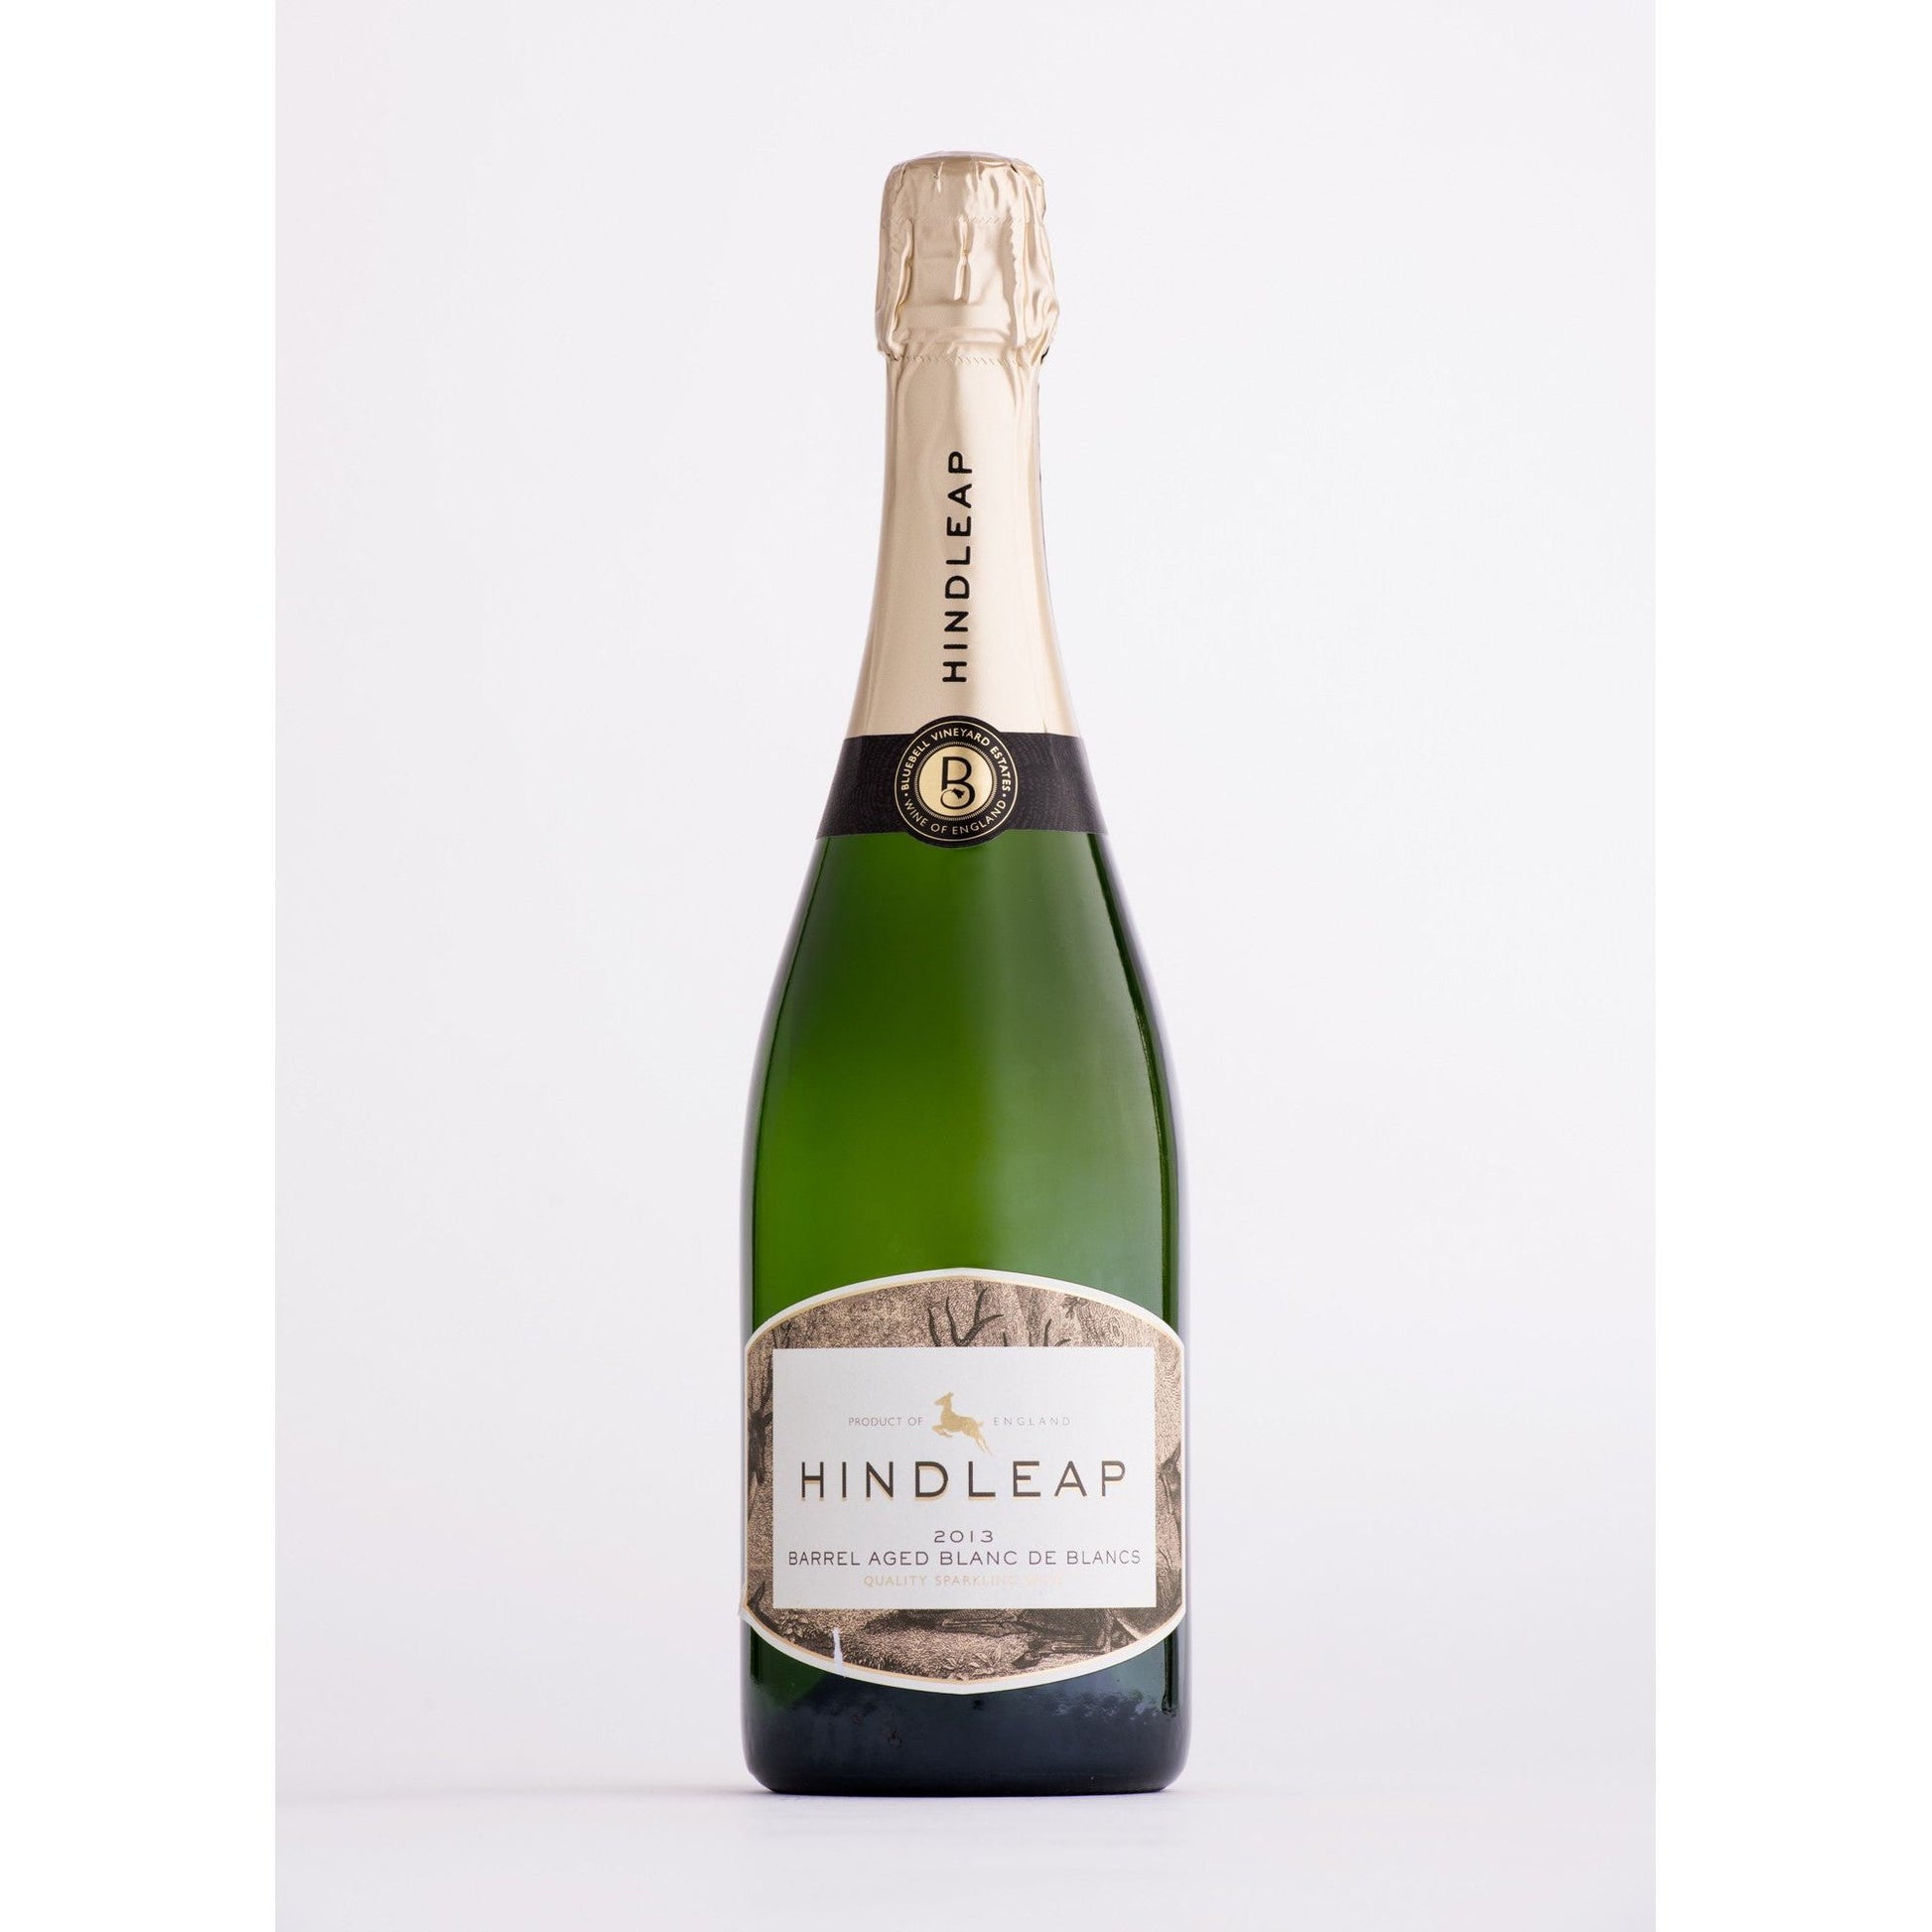 Hindleap Barrel aged Blanc de Blanc Sparkling White The English Wine Collection 